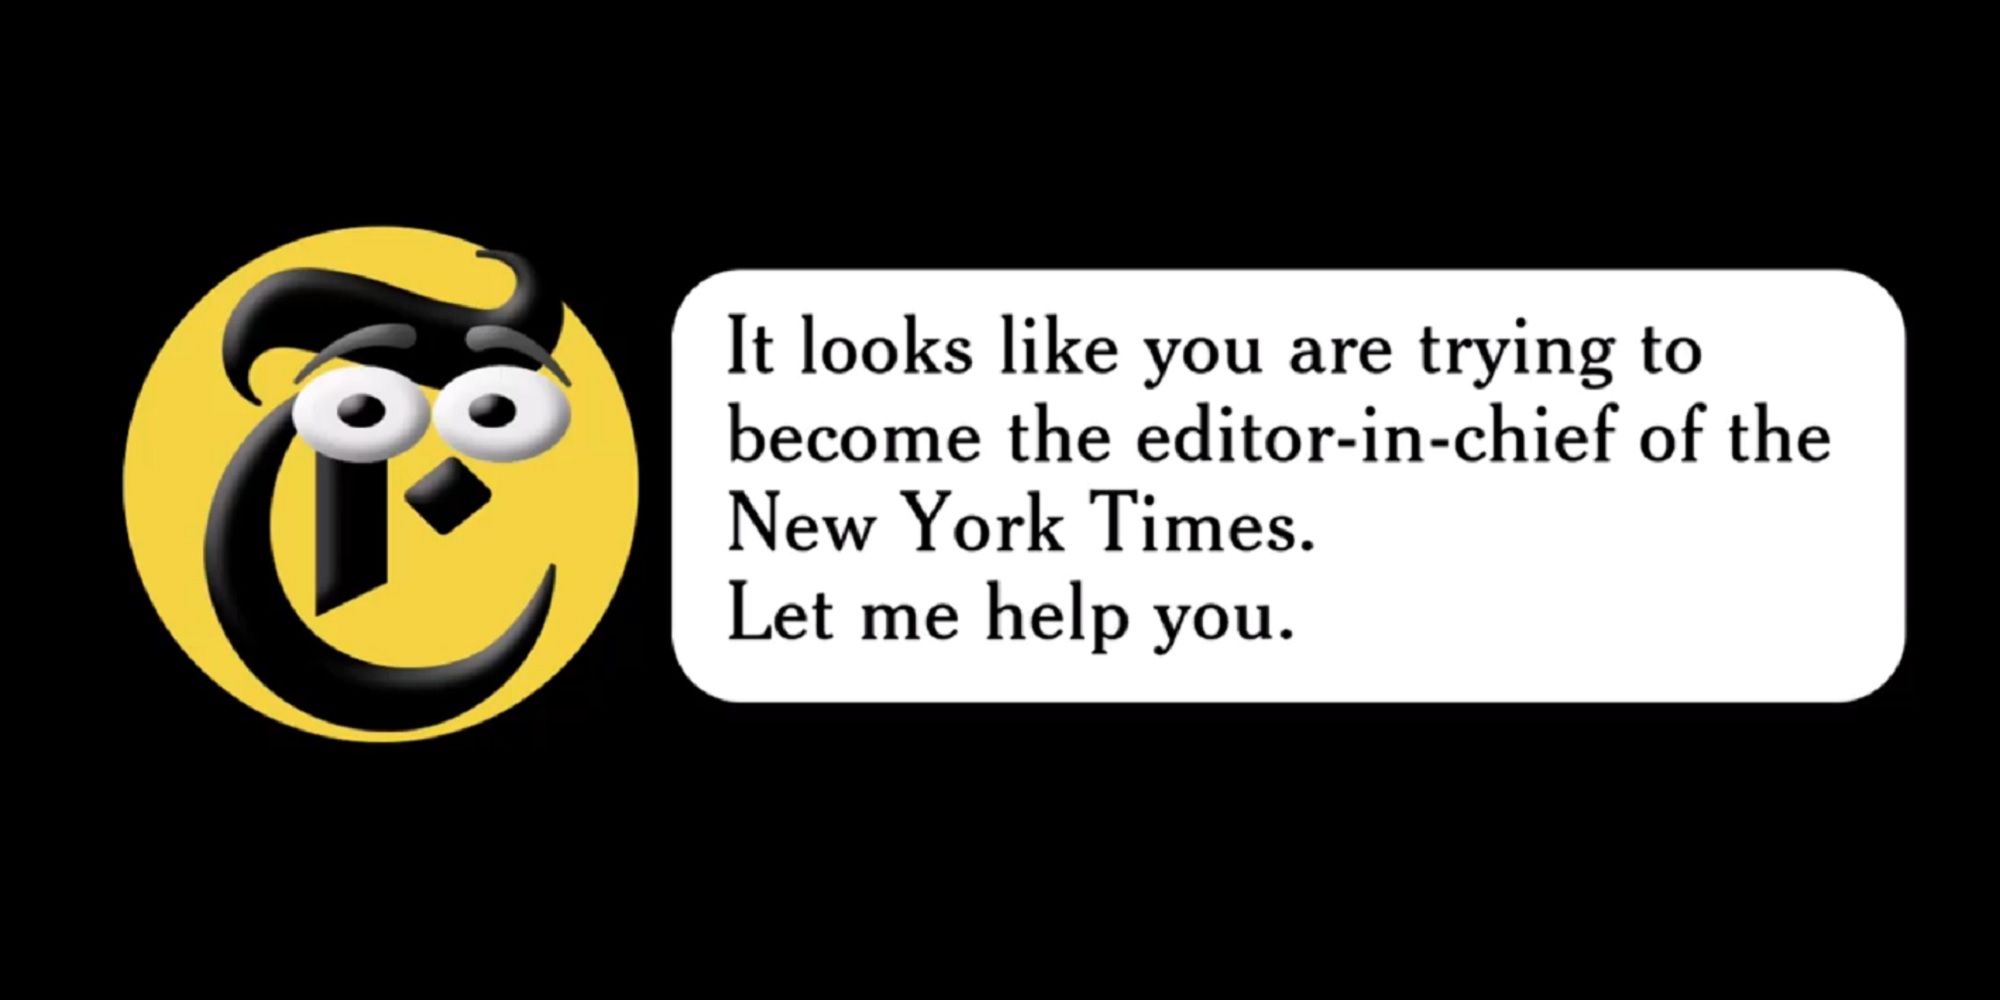 The New York Times Simulator clippy giving advice